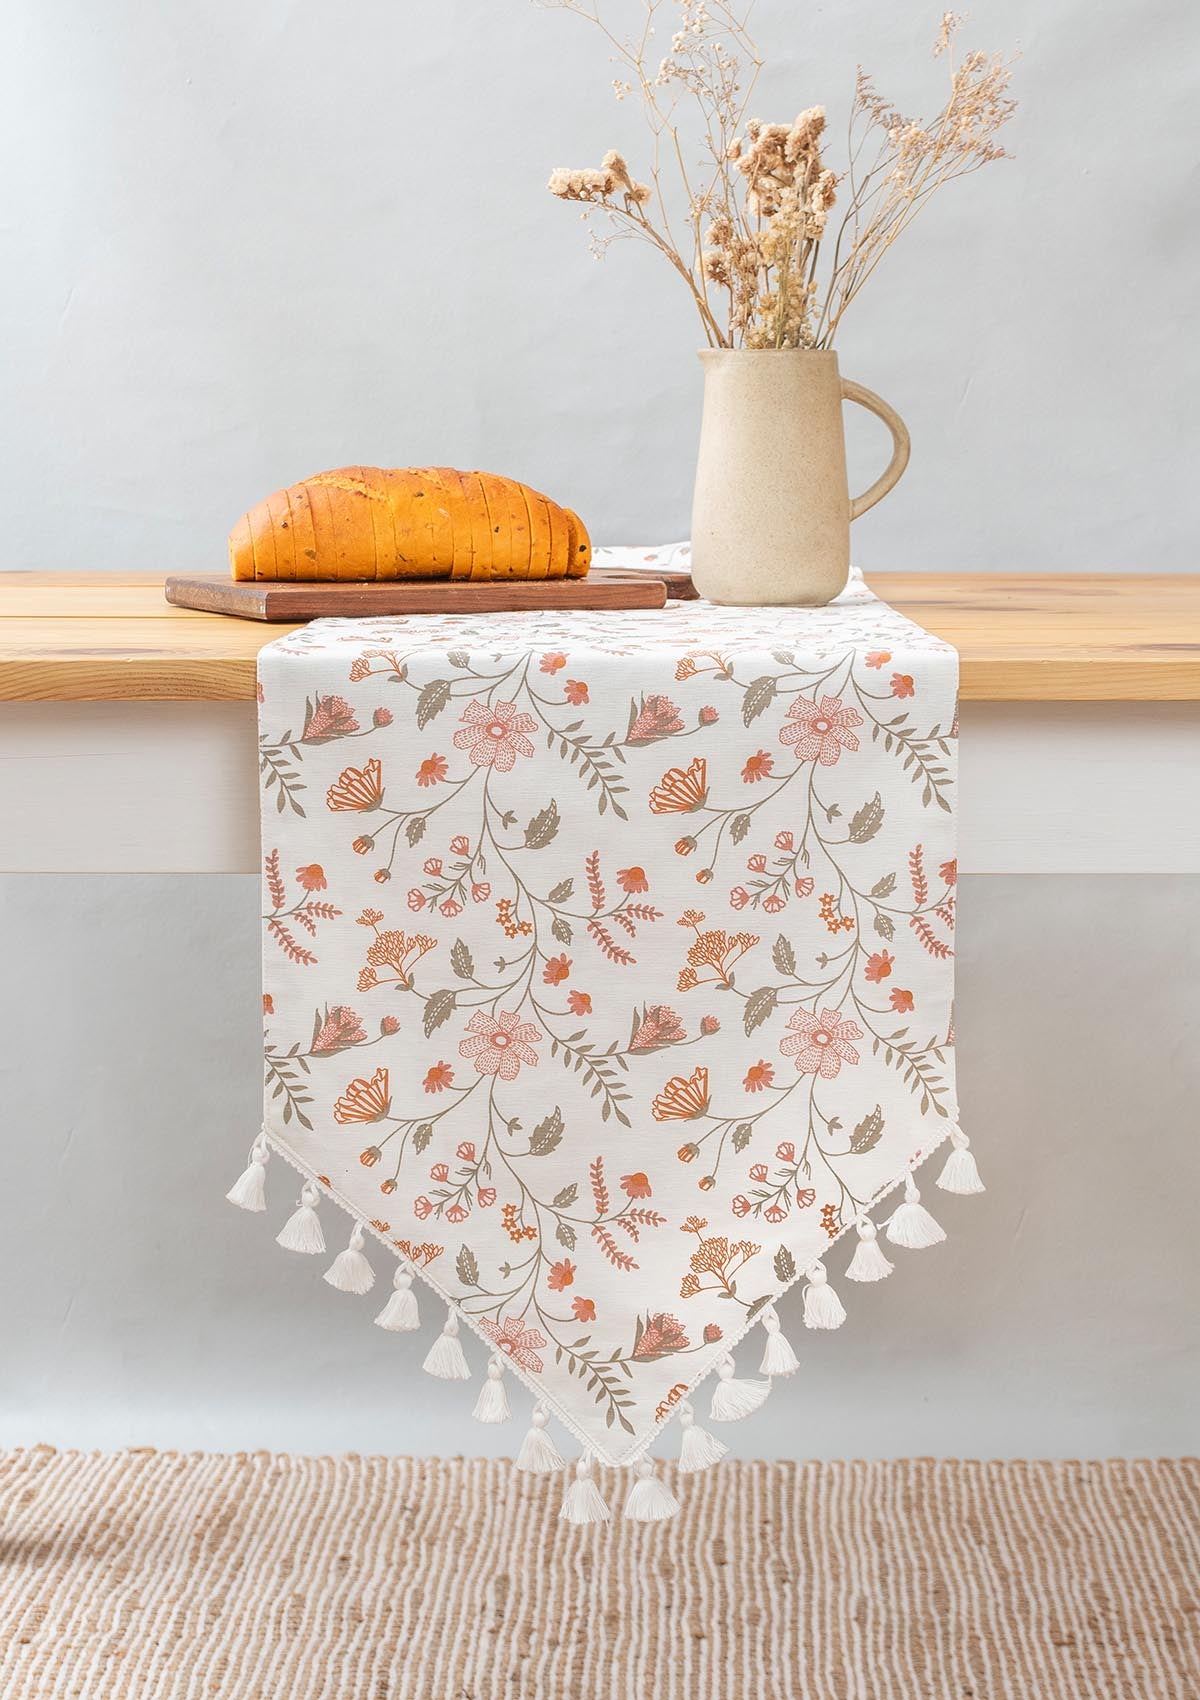 Forest bloom 100% cotton floral table runner for 4 seater or 6 seater Dining with tassels - Orange